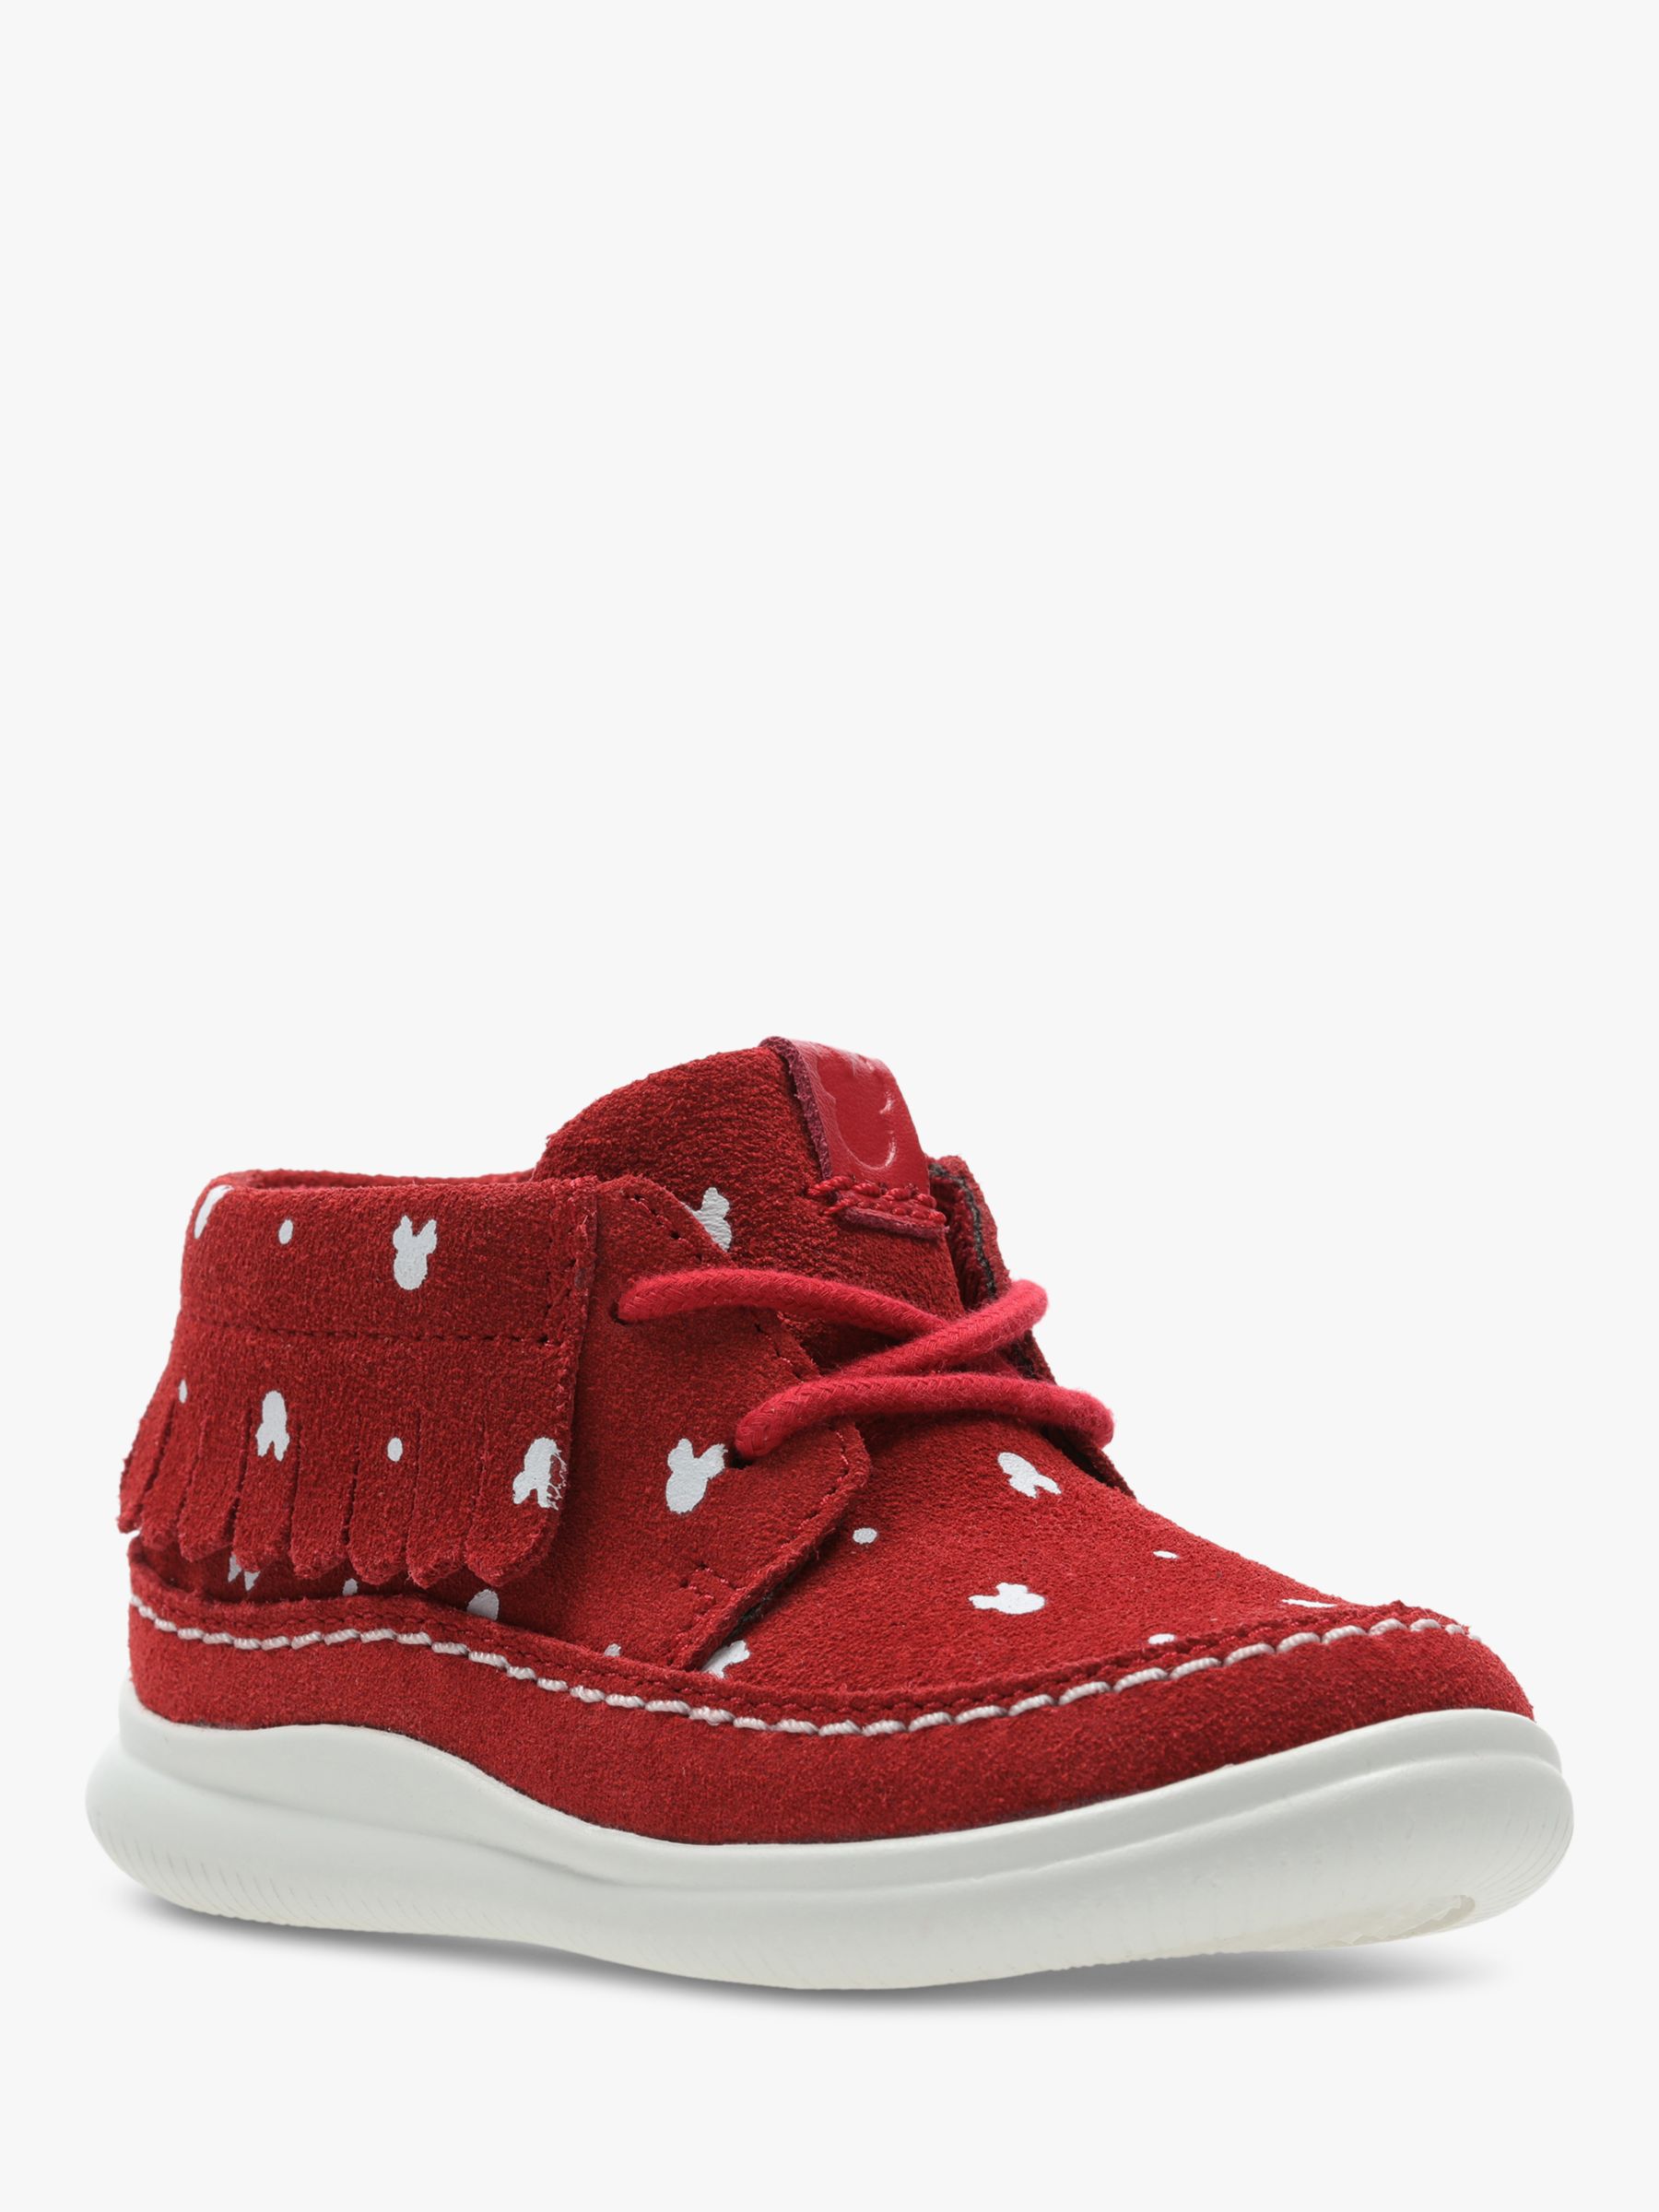 clarks minnie mouse trainers